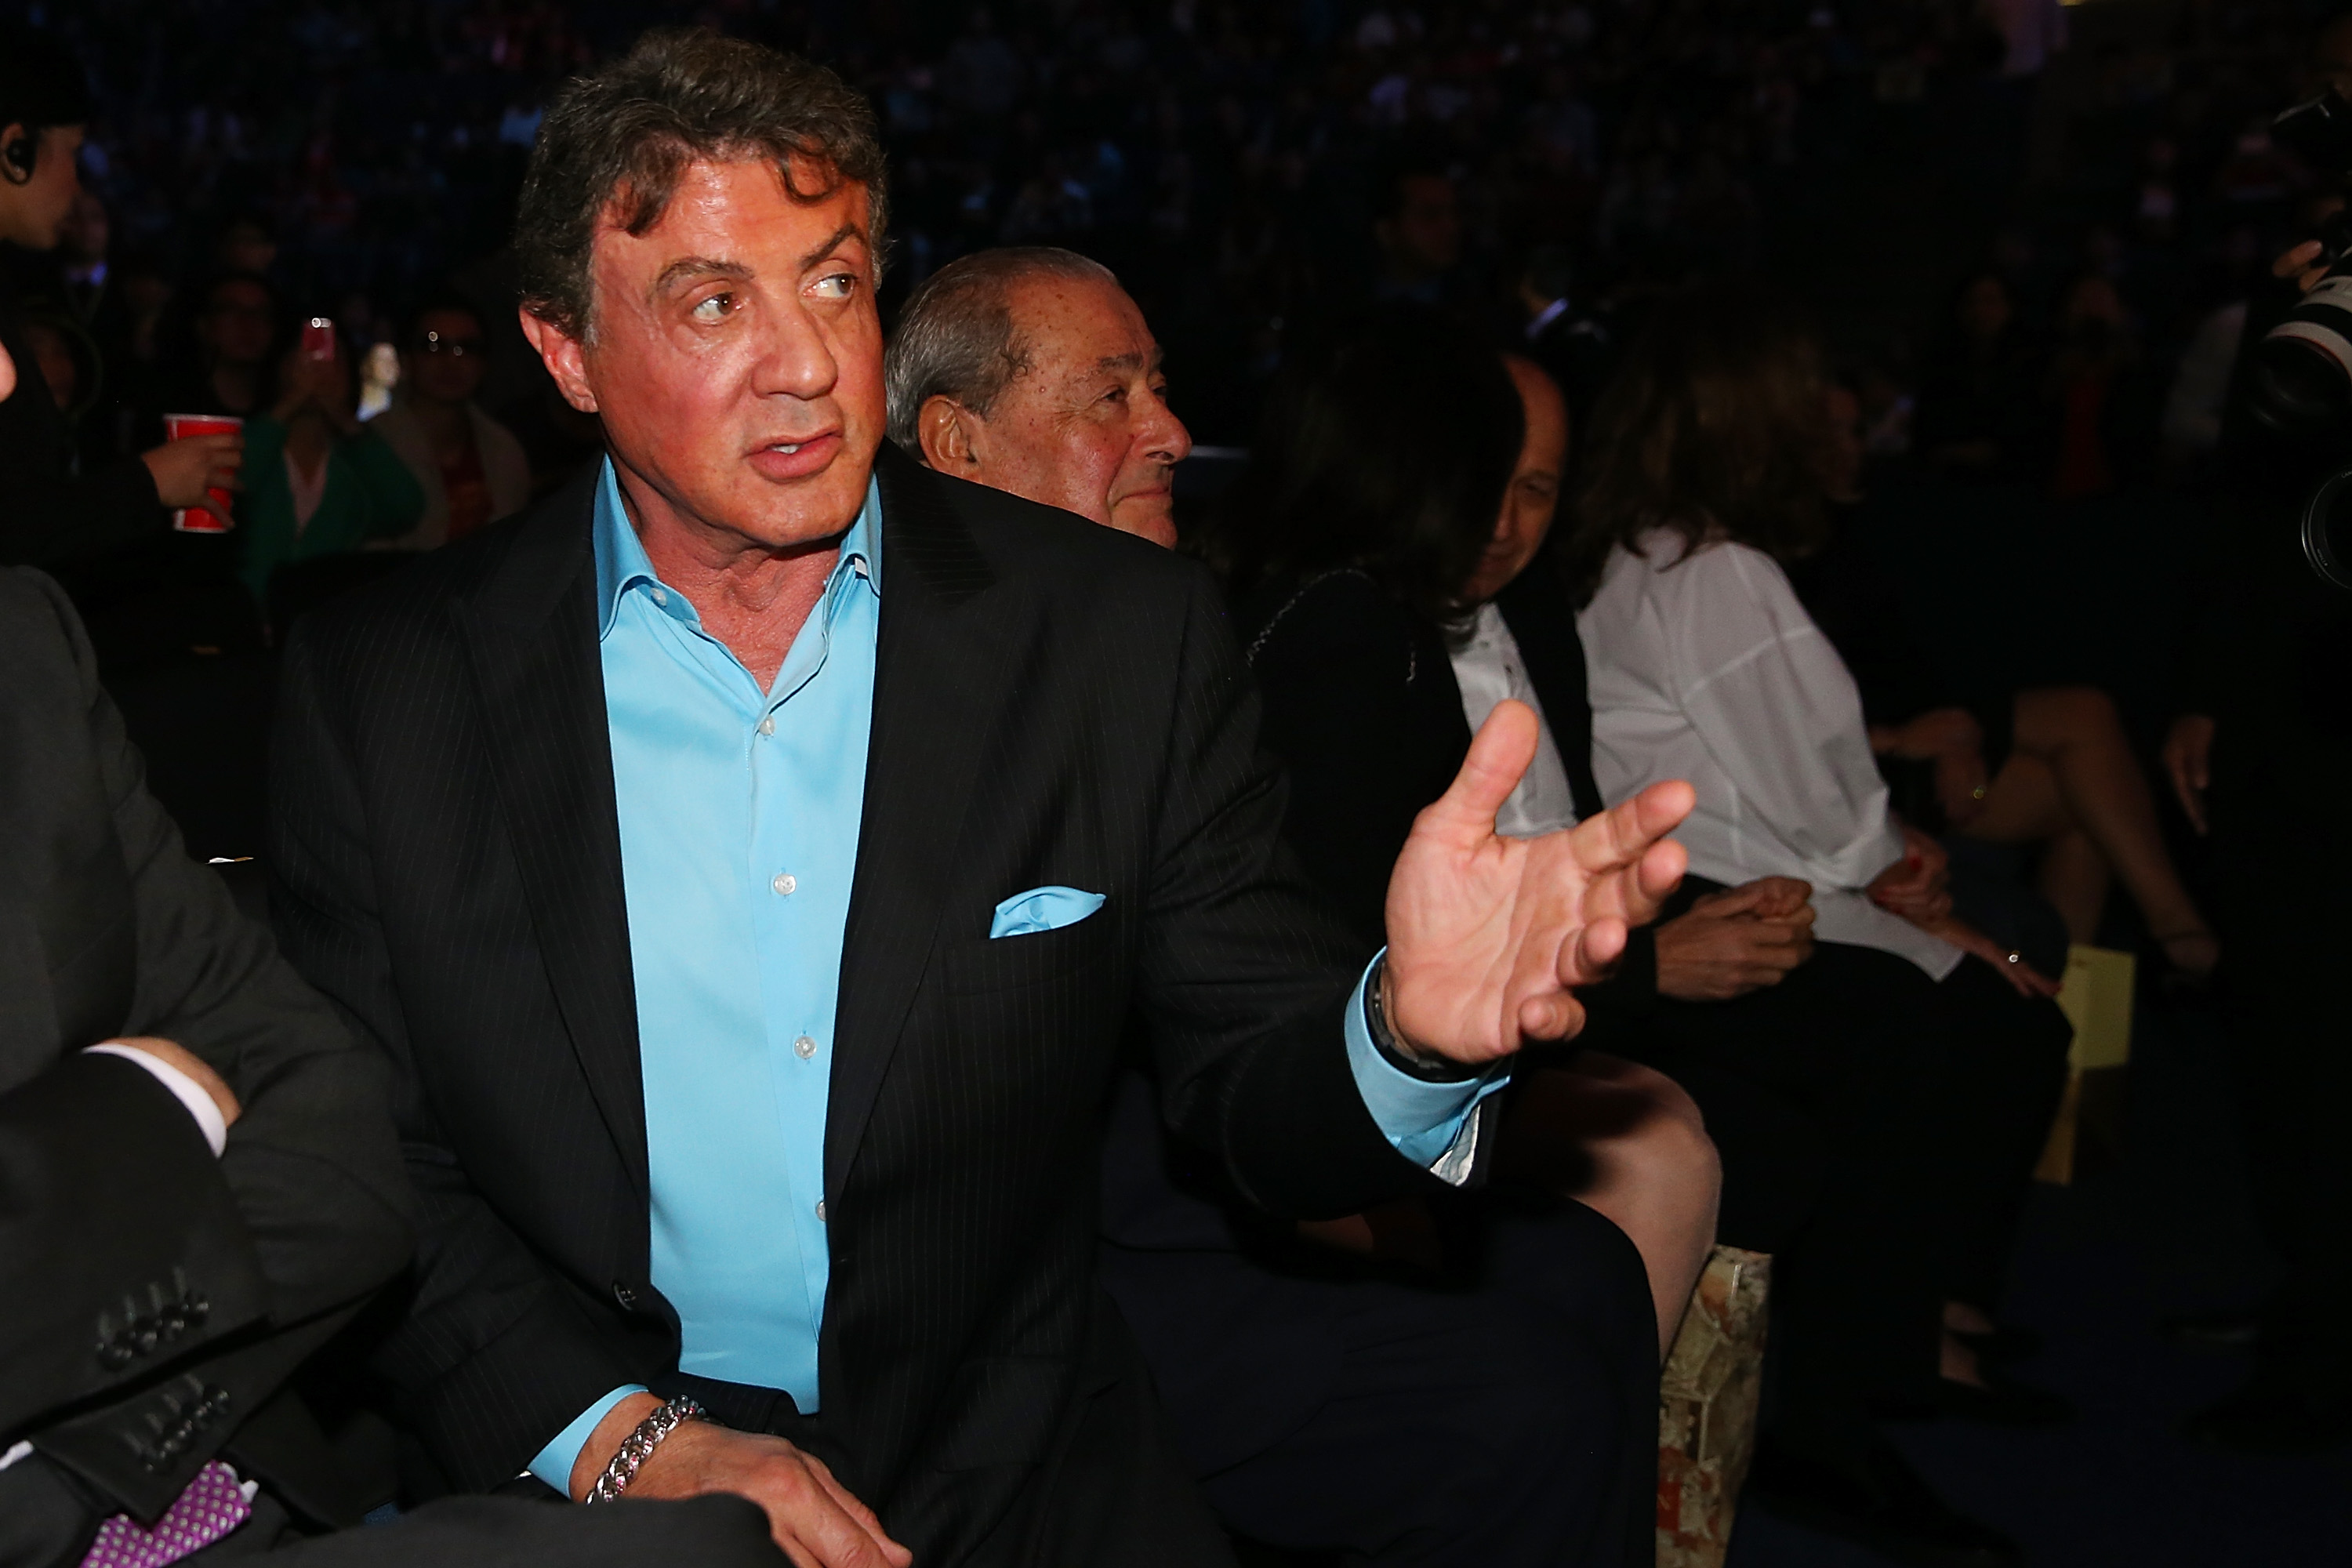 Sylvester Stallone looks on during a boxing match at The Venetian on November 23, 2014 in Macau, China (Chris Hyde—Getty Images)